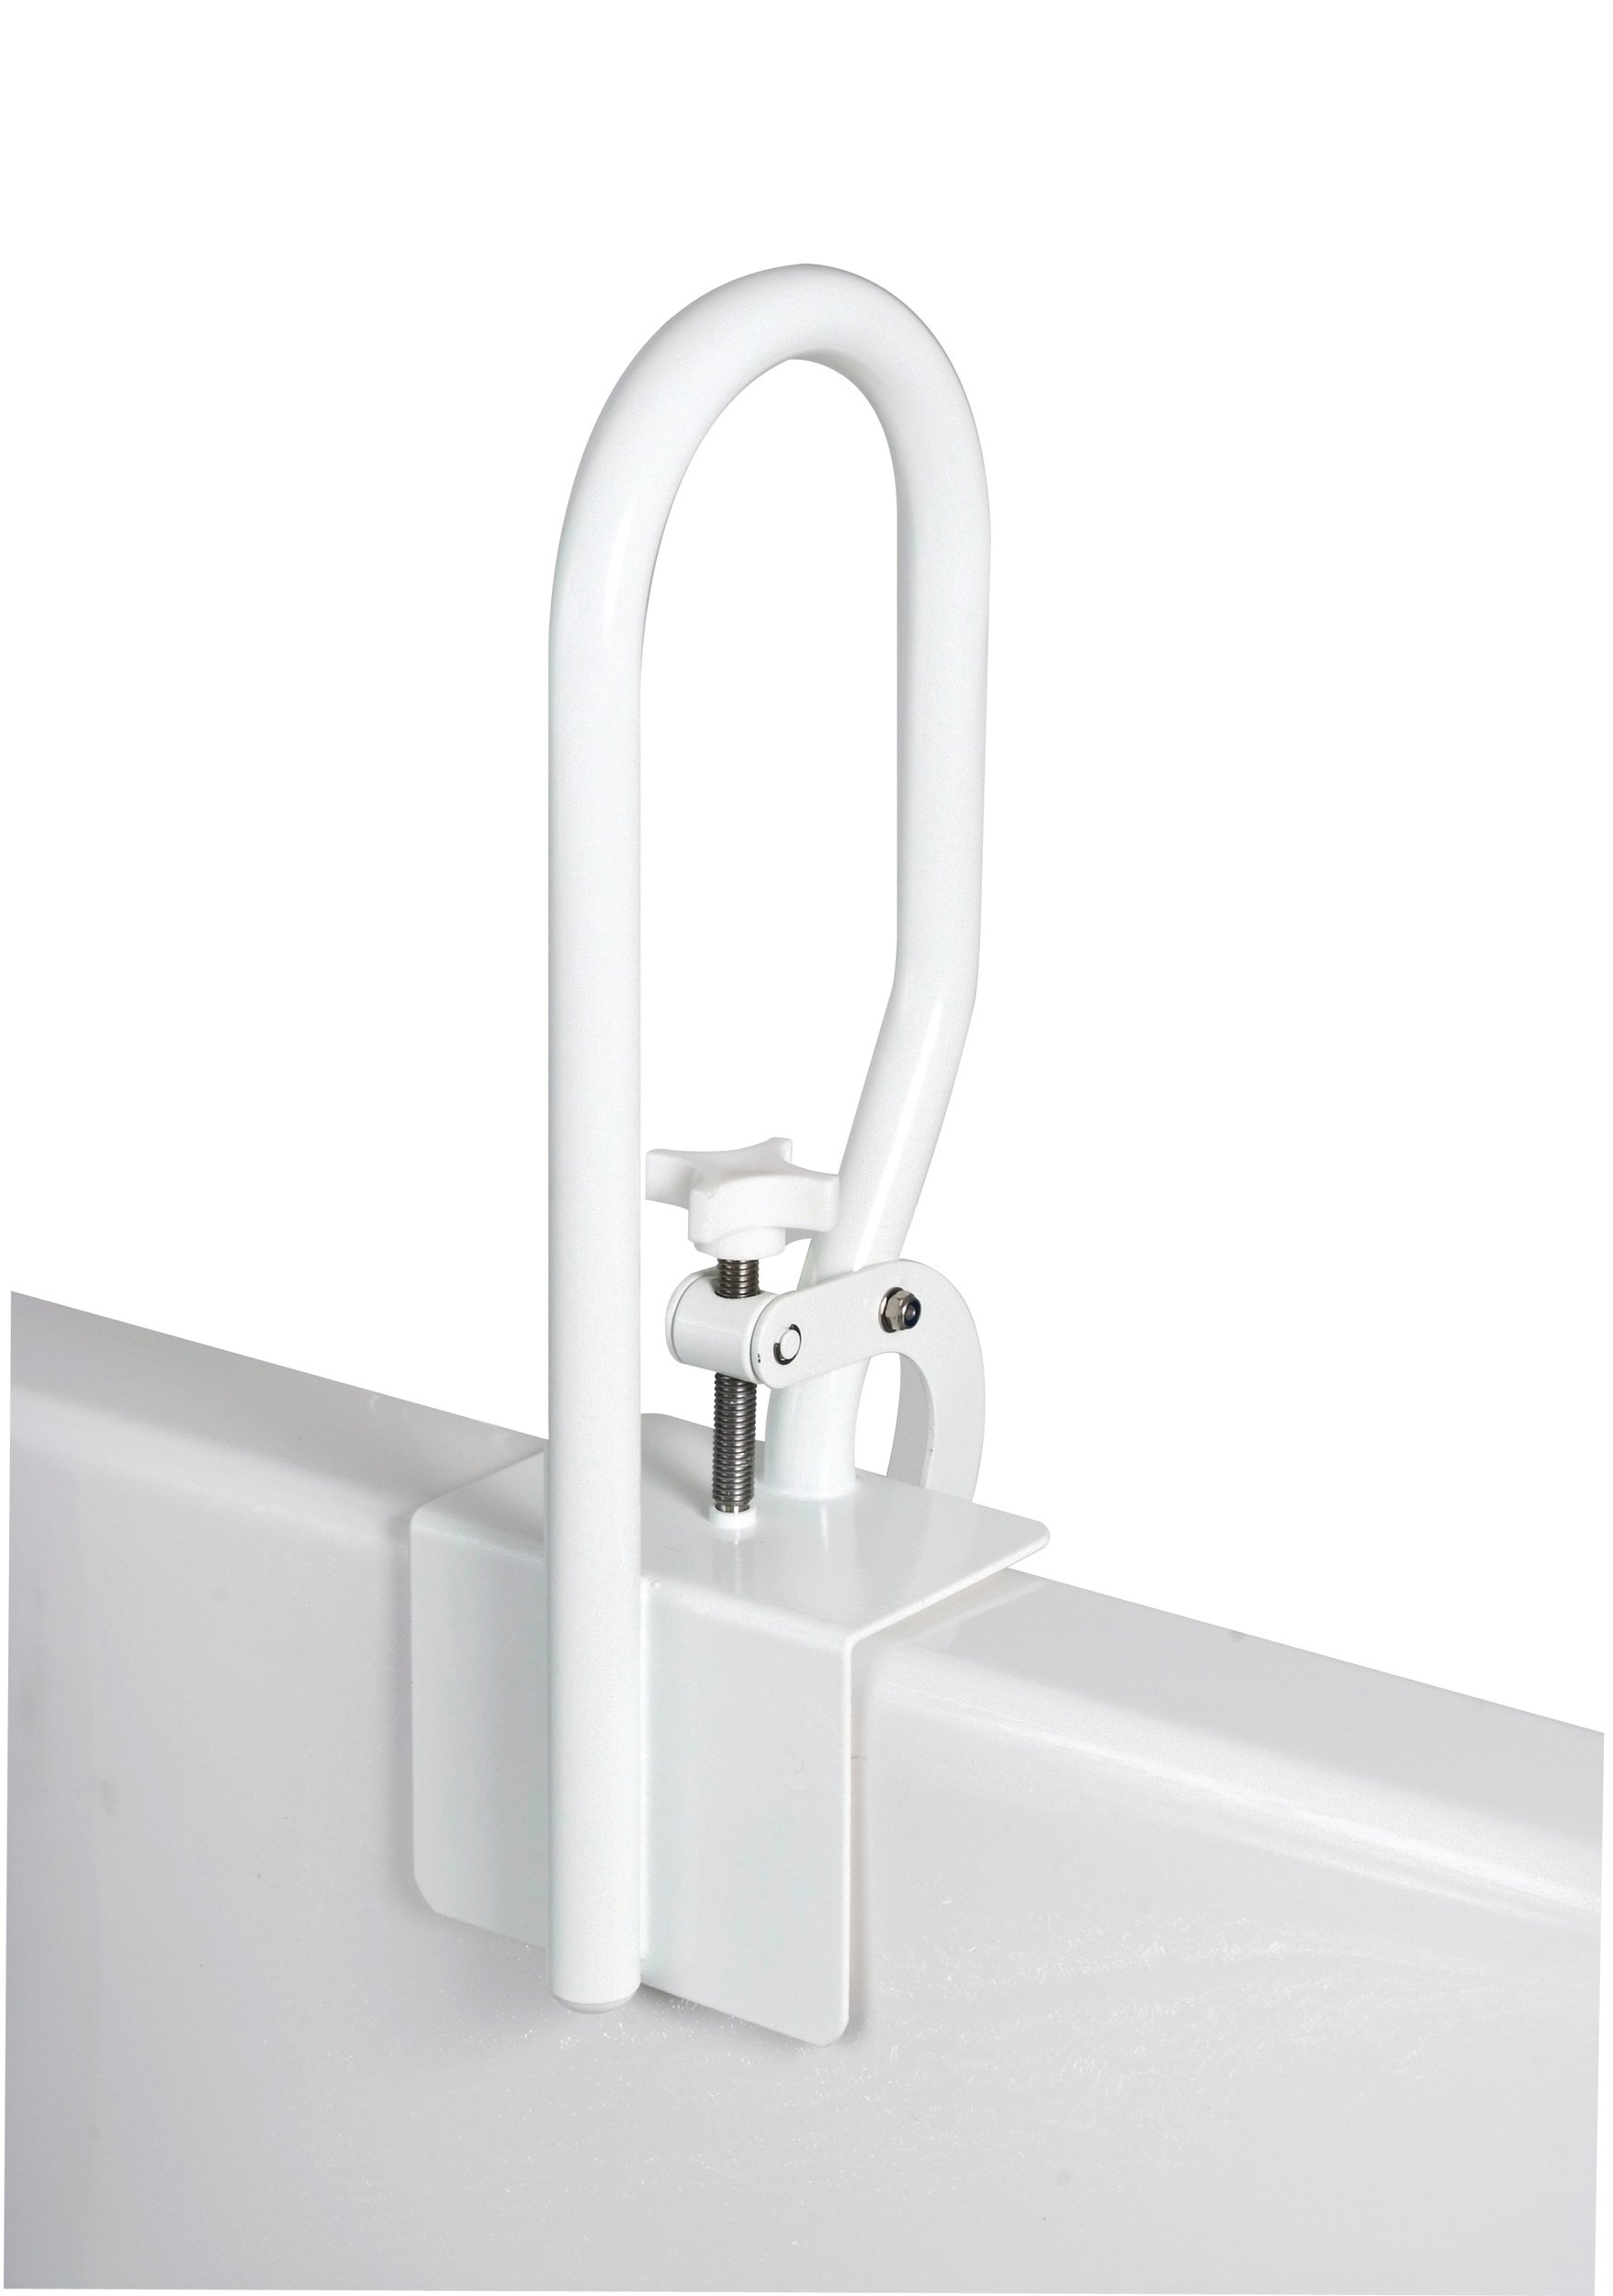 Bluestone Bathtub Safety Bar Mobility and Support Assistance with  Adjustable Clamp and Rubber Grip White